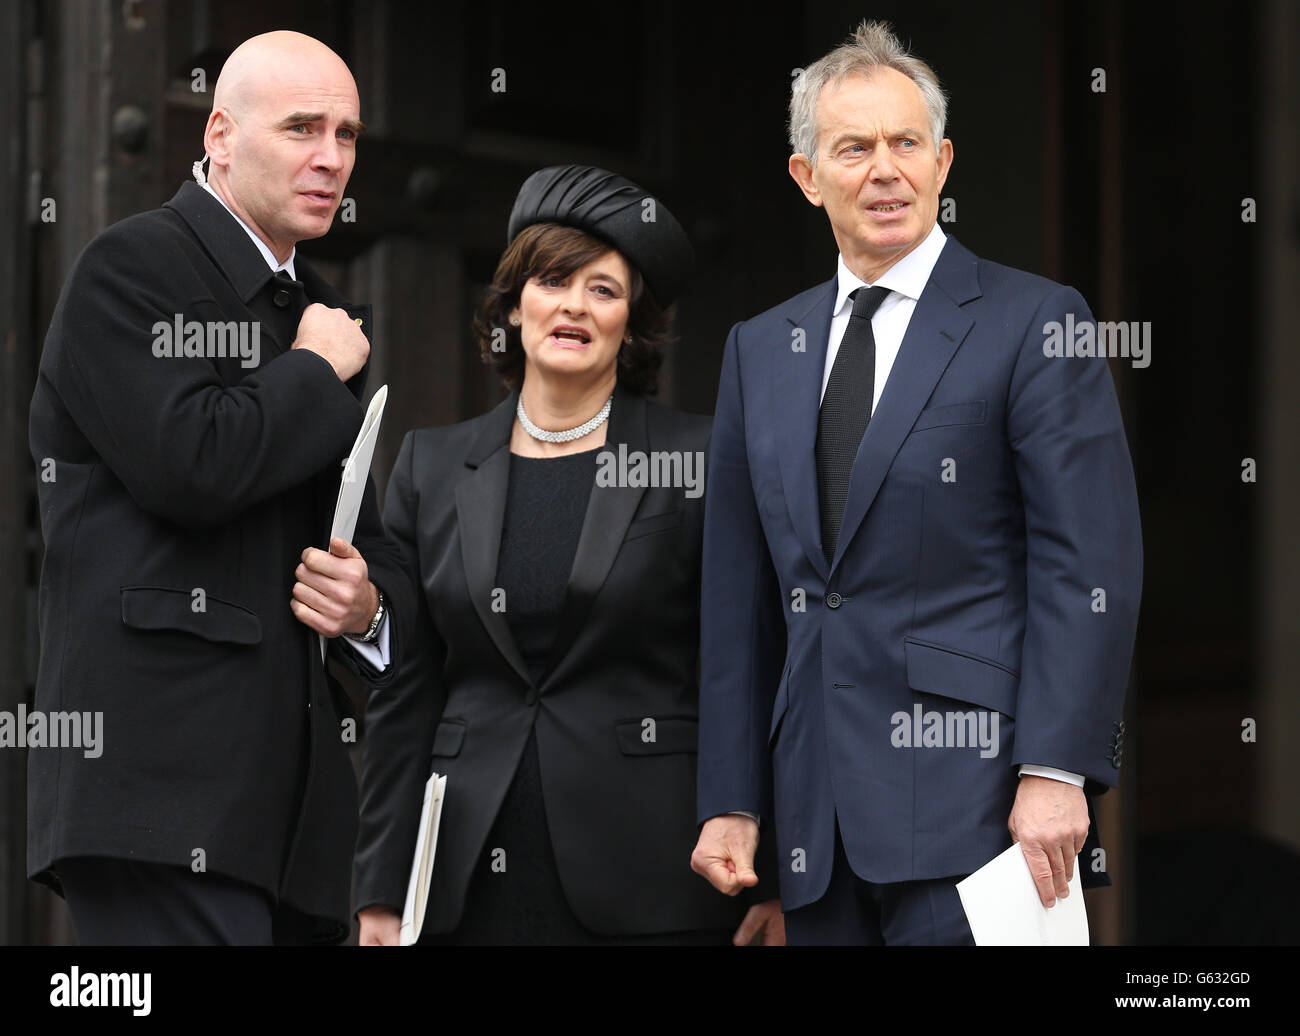 Former Prime Minister Tony Blair and his wife Cherie Blair leave the Ceremonial funeral of former British Prime Minister Baroness Thatcher at St Paul's Cathedral. Stock Photo